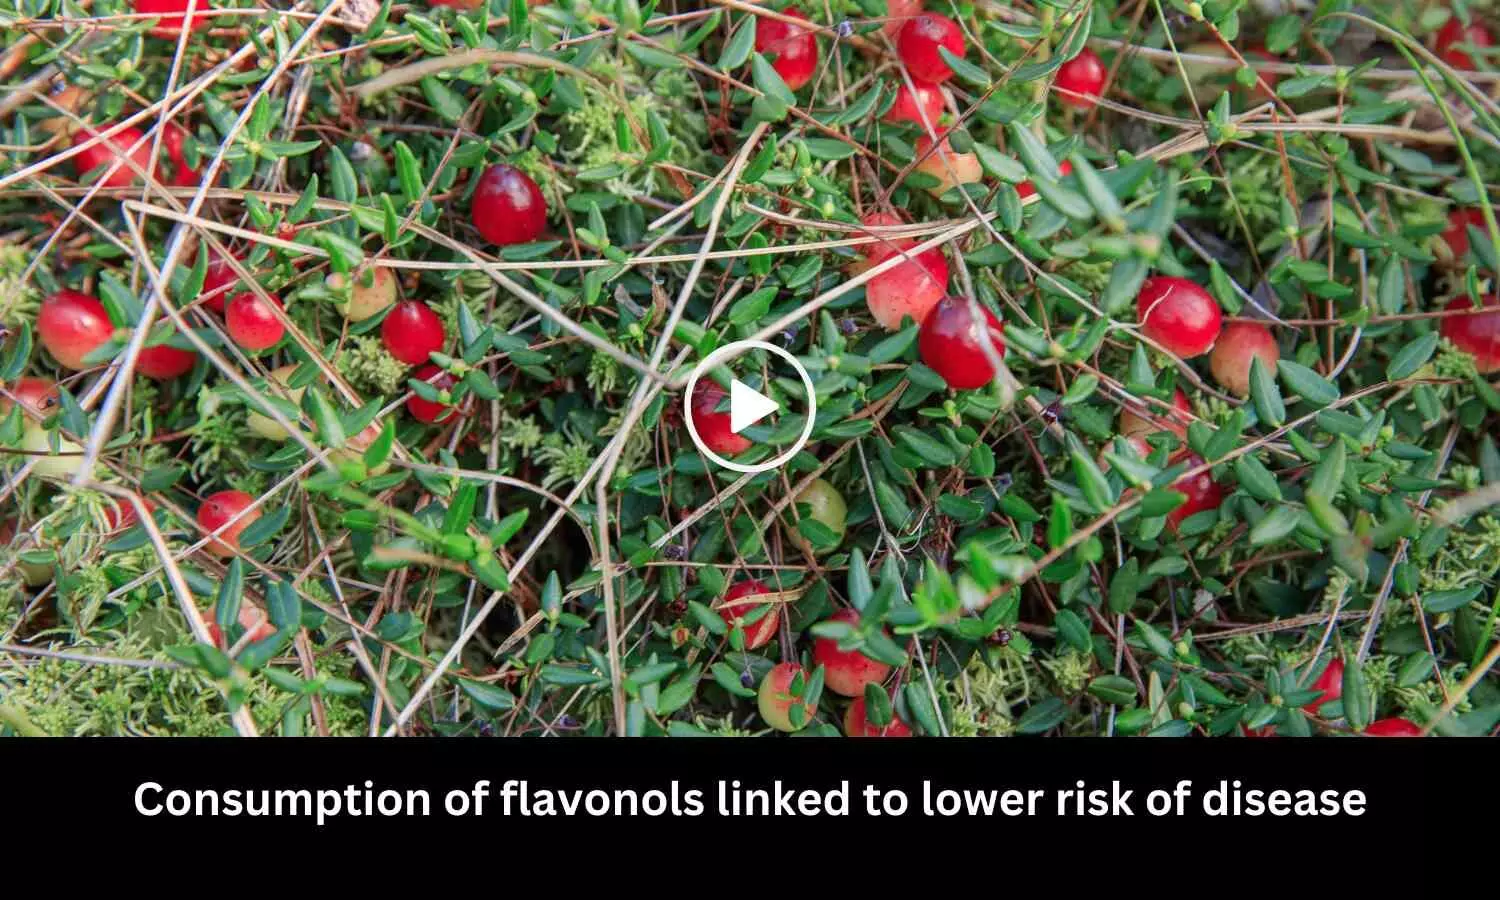 Consumption of flavonols linked to lower risk of disease